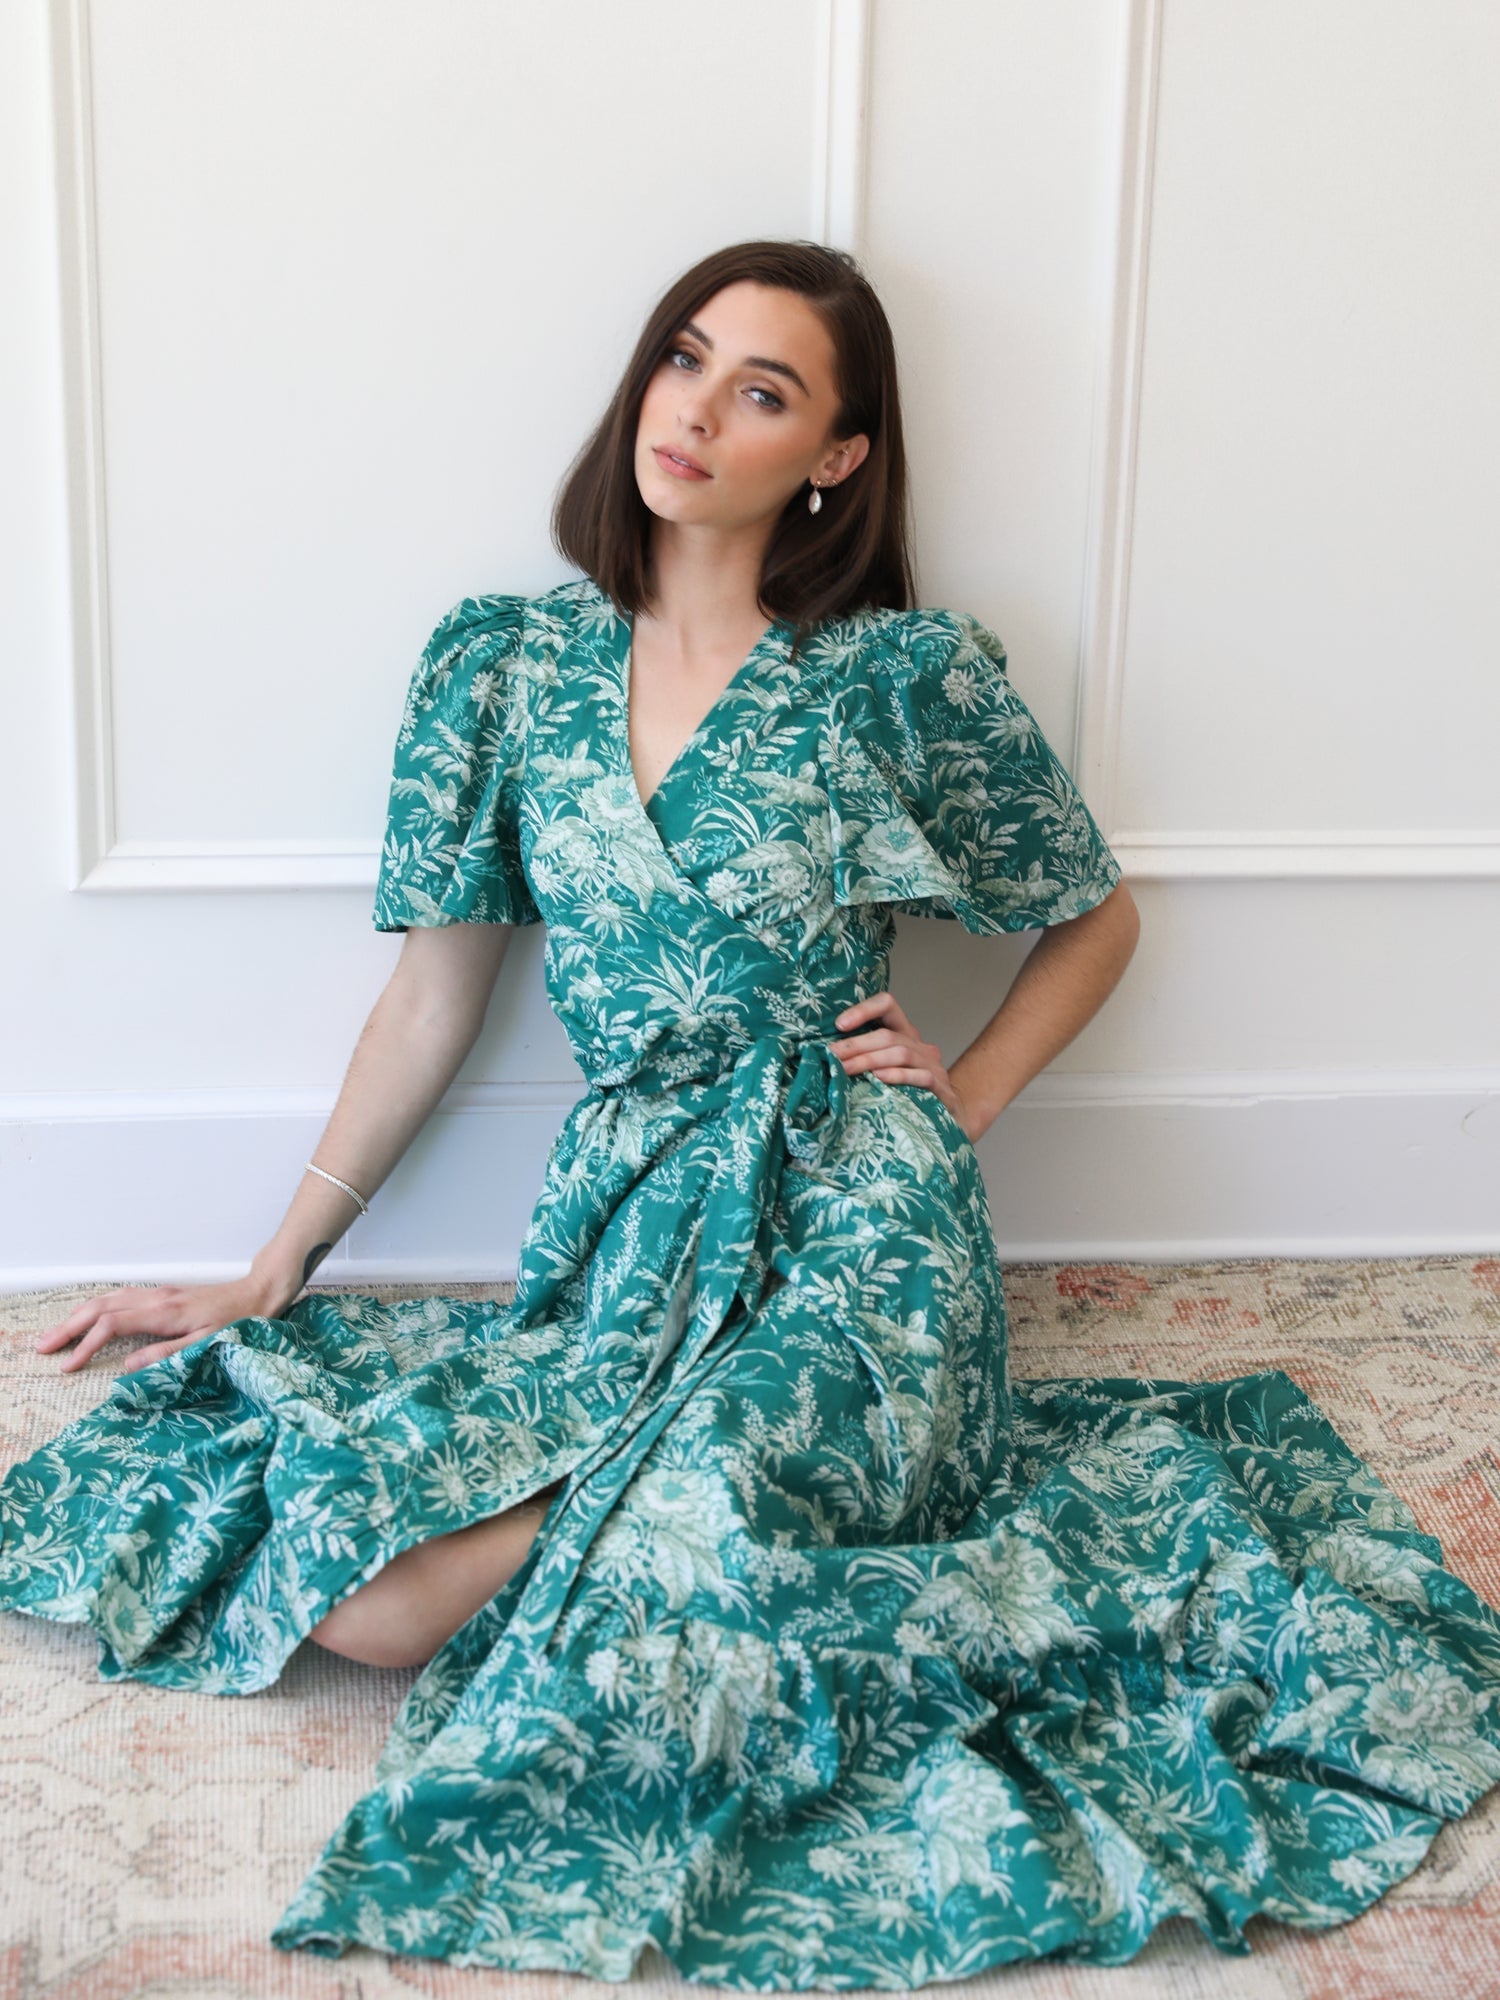 MILLE Clothing Helena Dress in Jade Paradise